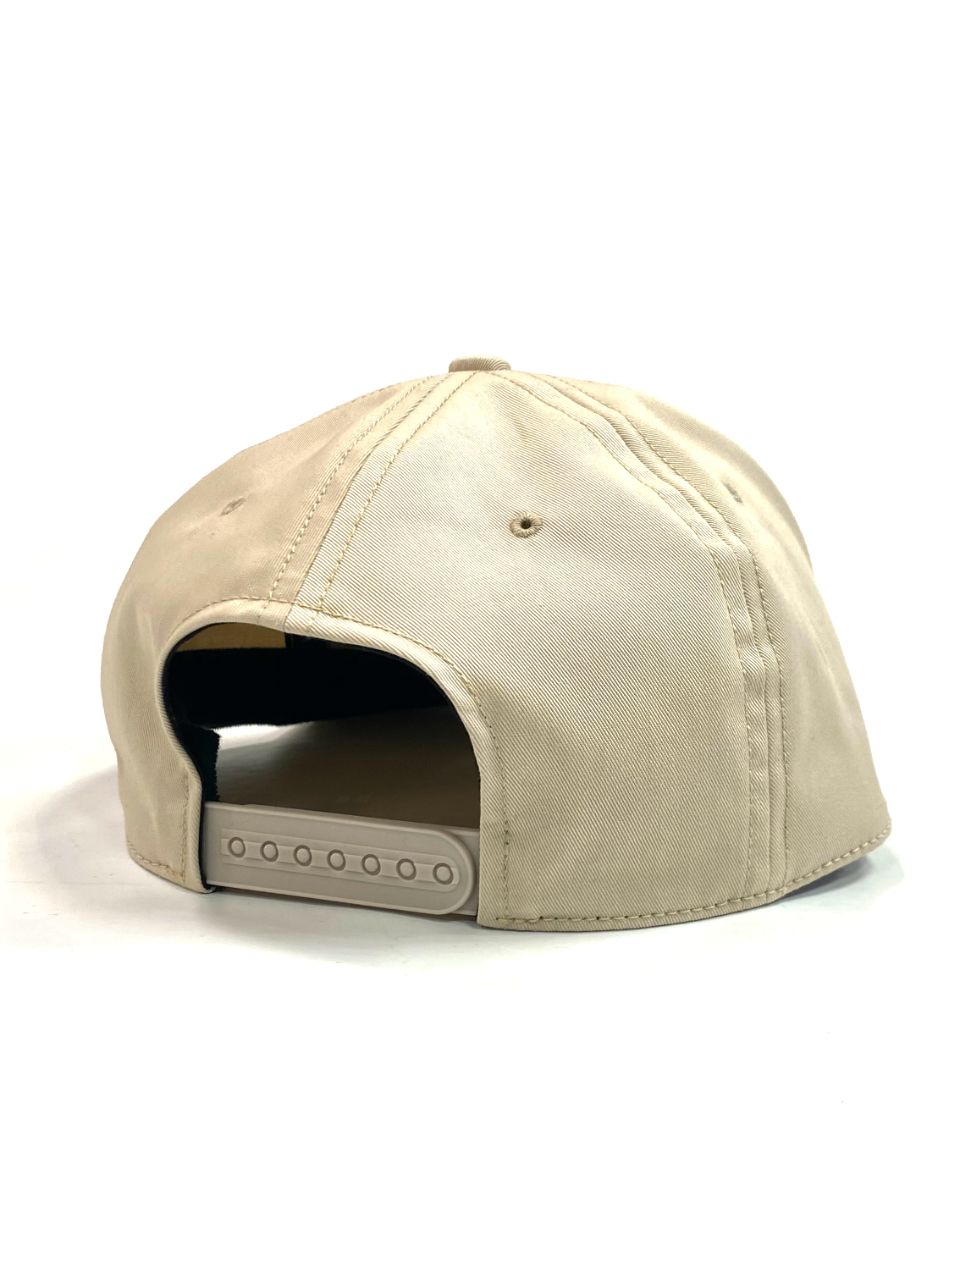 COOTIE PRODUCTIONS - Smooth Chino Cloth 5 Panel Cap (BEIGE) / ロゴ 